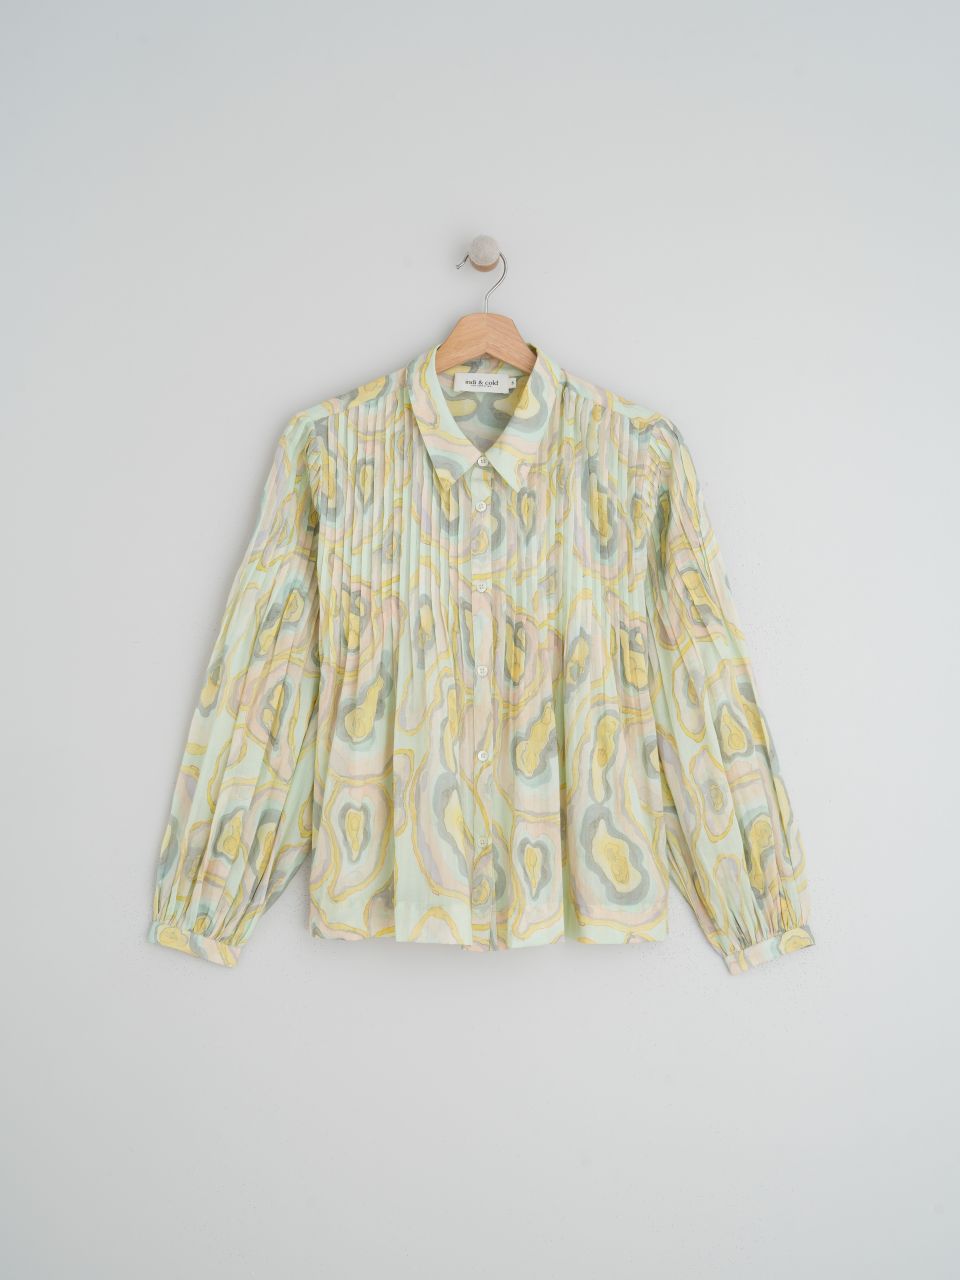 If you're looking for a shirt that's different, you're in the right place. This Pleated Geode long sleeve, fitted-shoulder shirt by Indi &amp; Cold has light pleats all over the top and sleeves. The voile fabric makes it light, voluminous and very cool for those slightly warmer days.